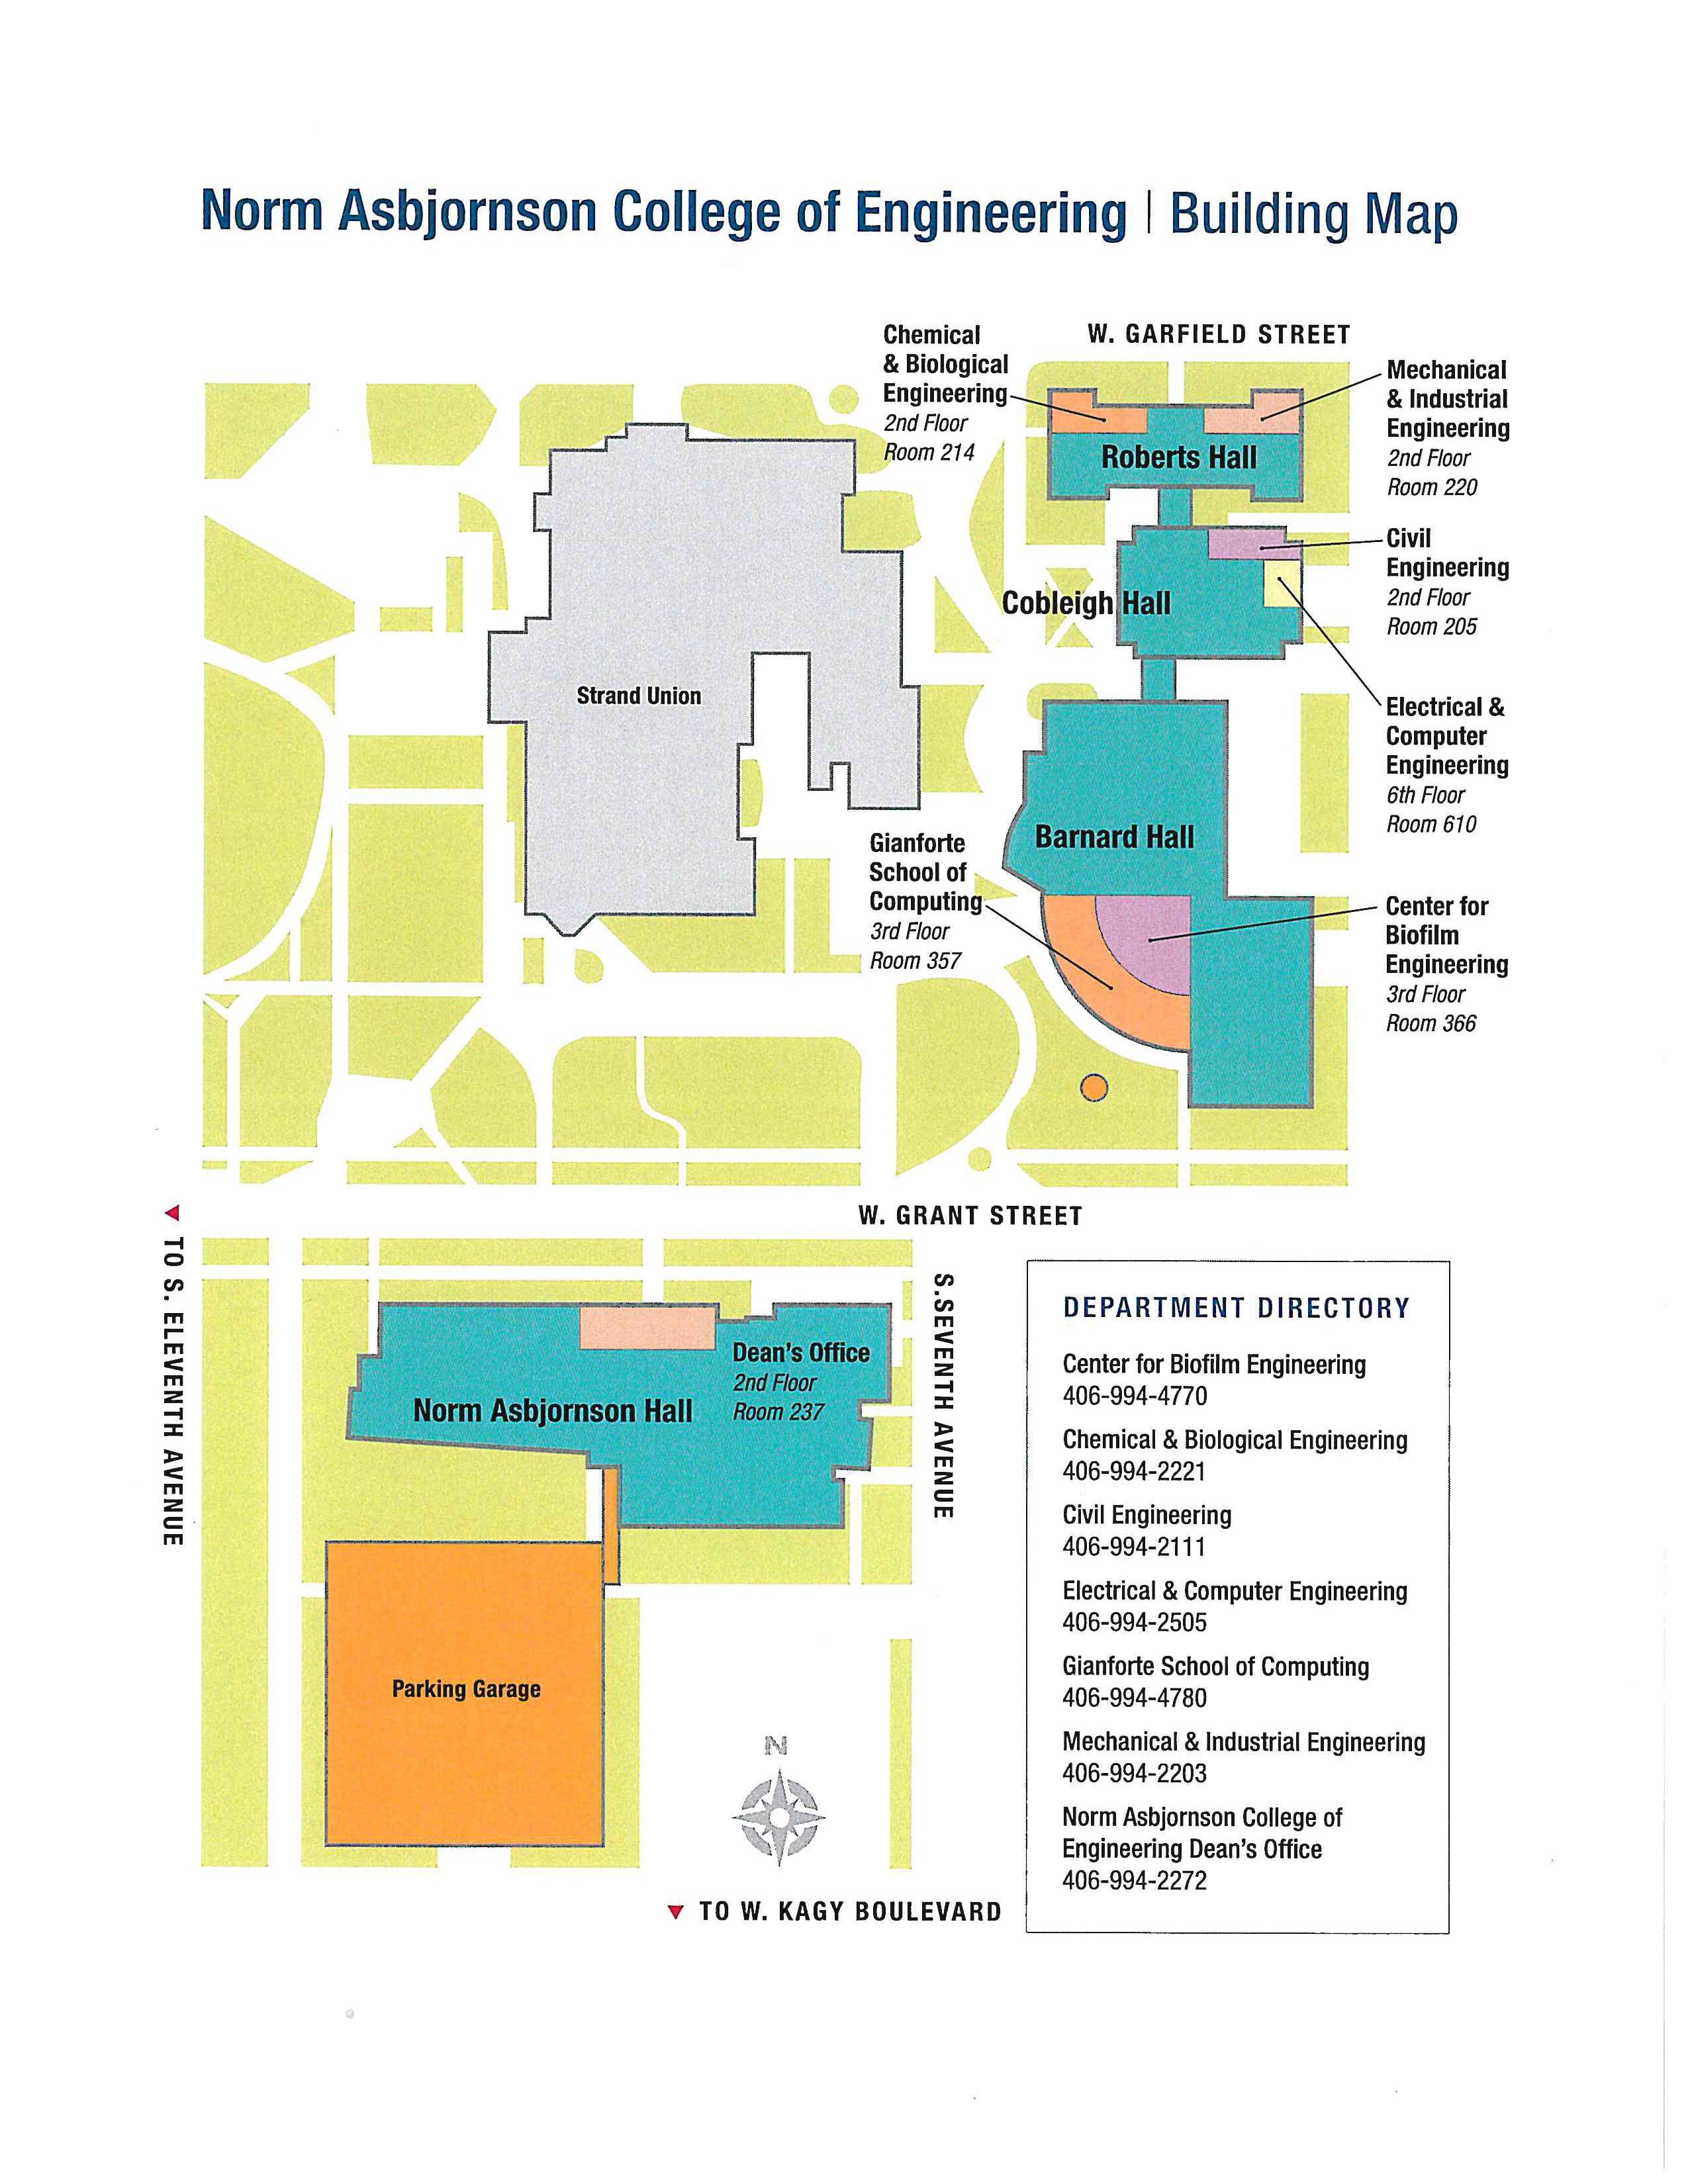 Map of Norm Asbjornson College of Engineering Buildings